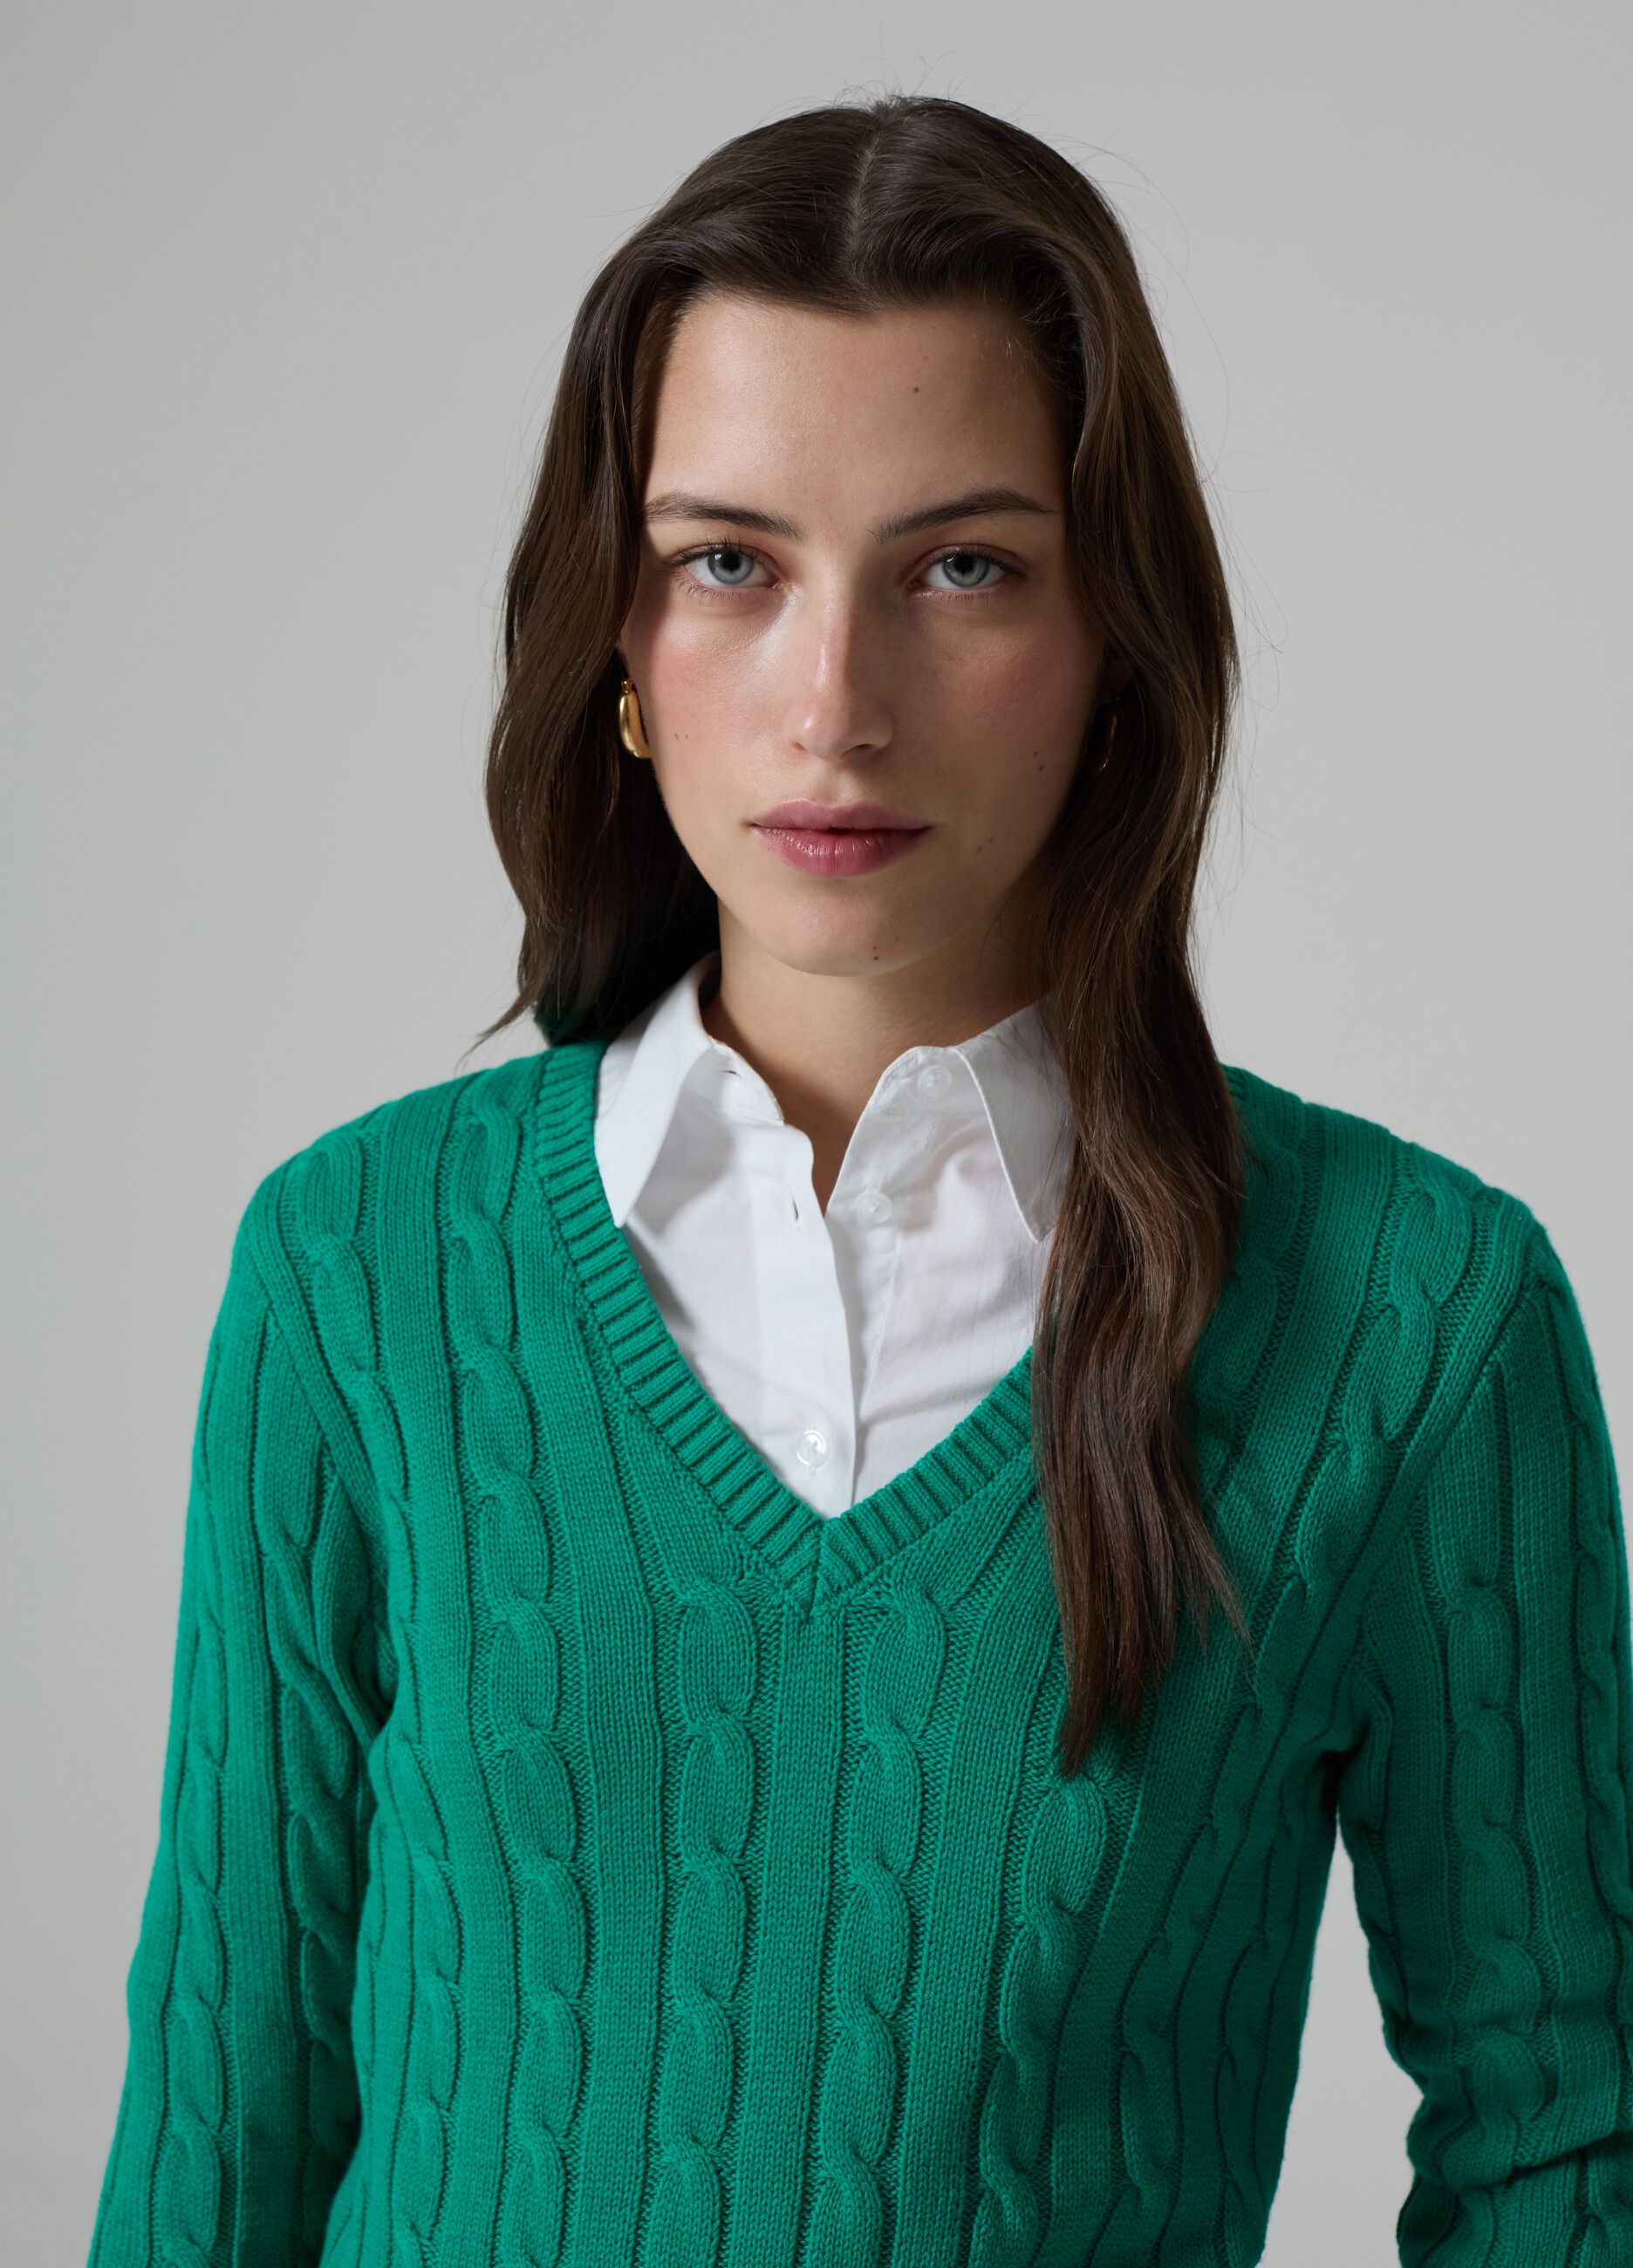 Pullover with cable design and V neck